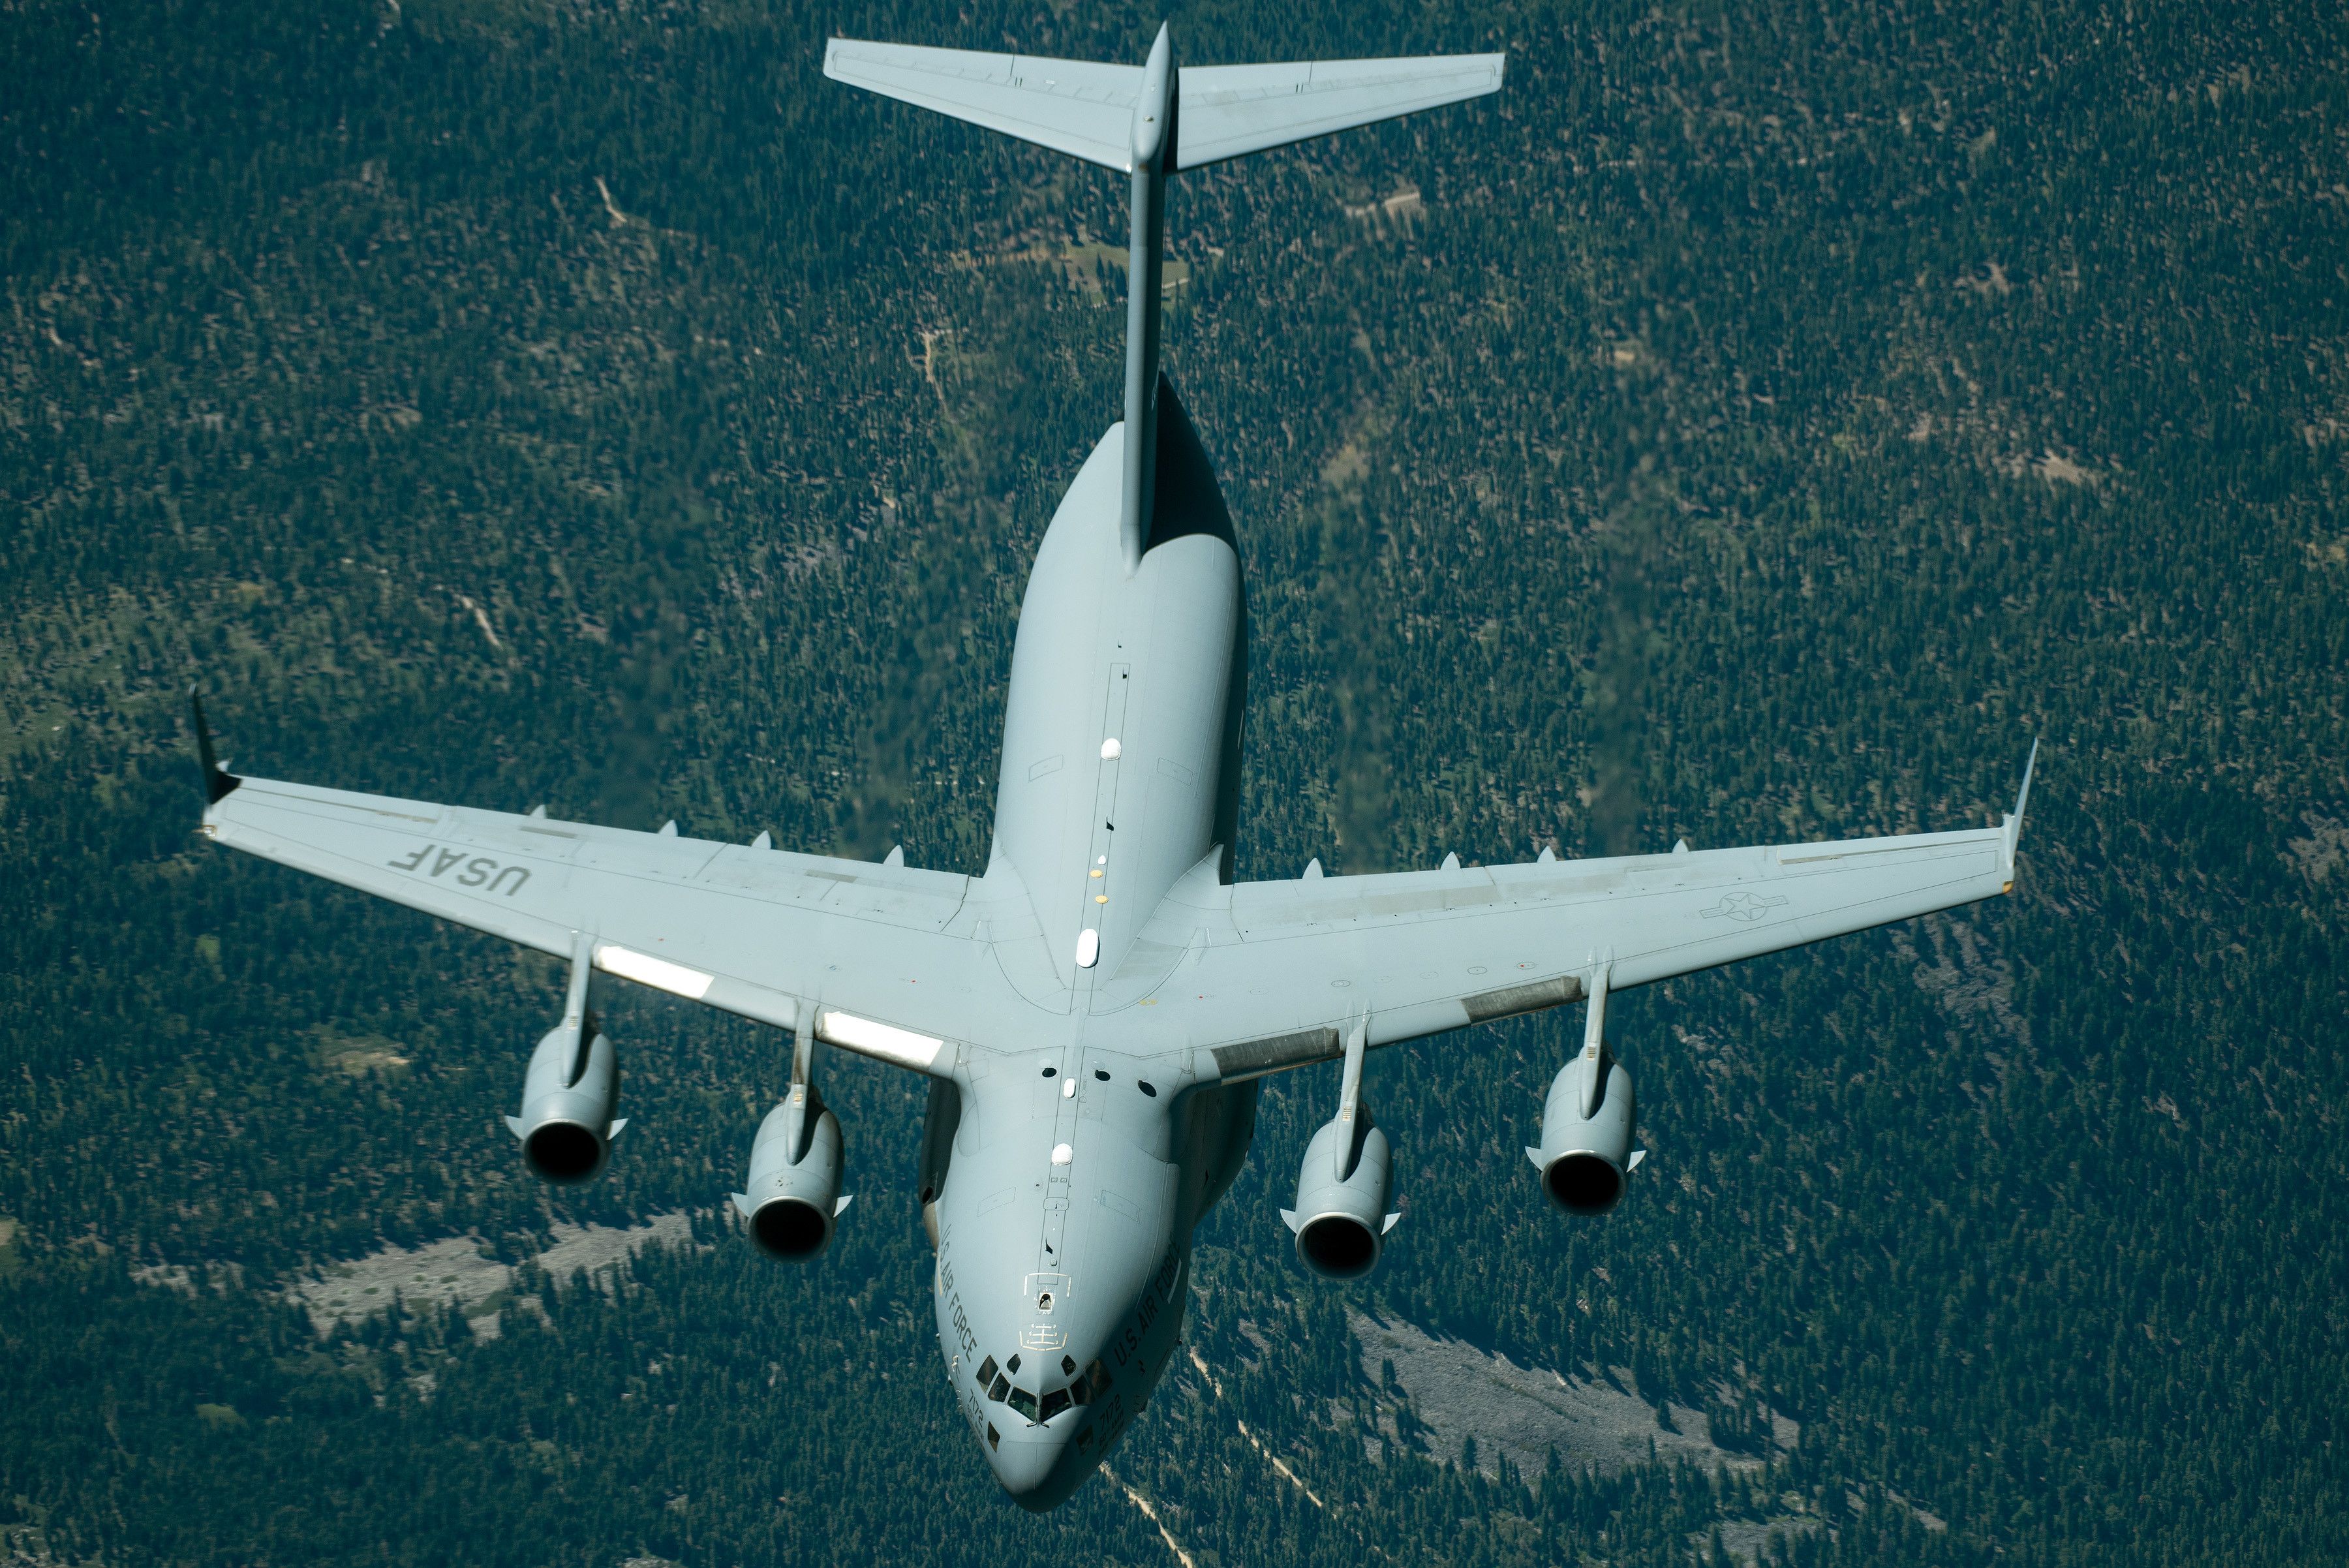 A C-17 Globemaster III flying over land, seen from above.